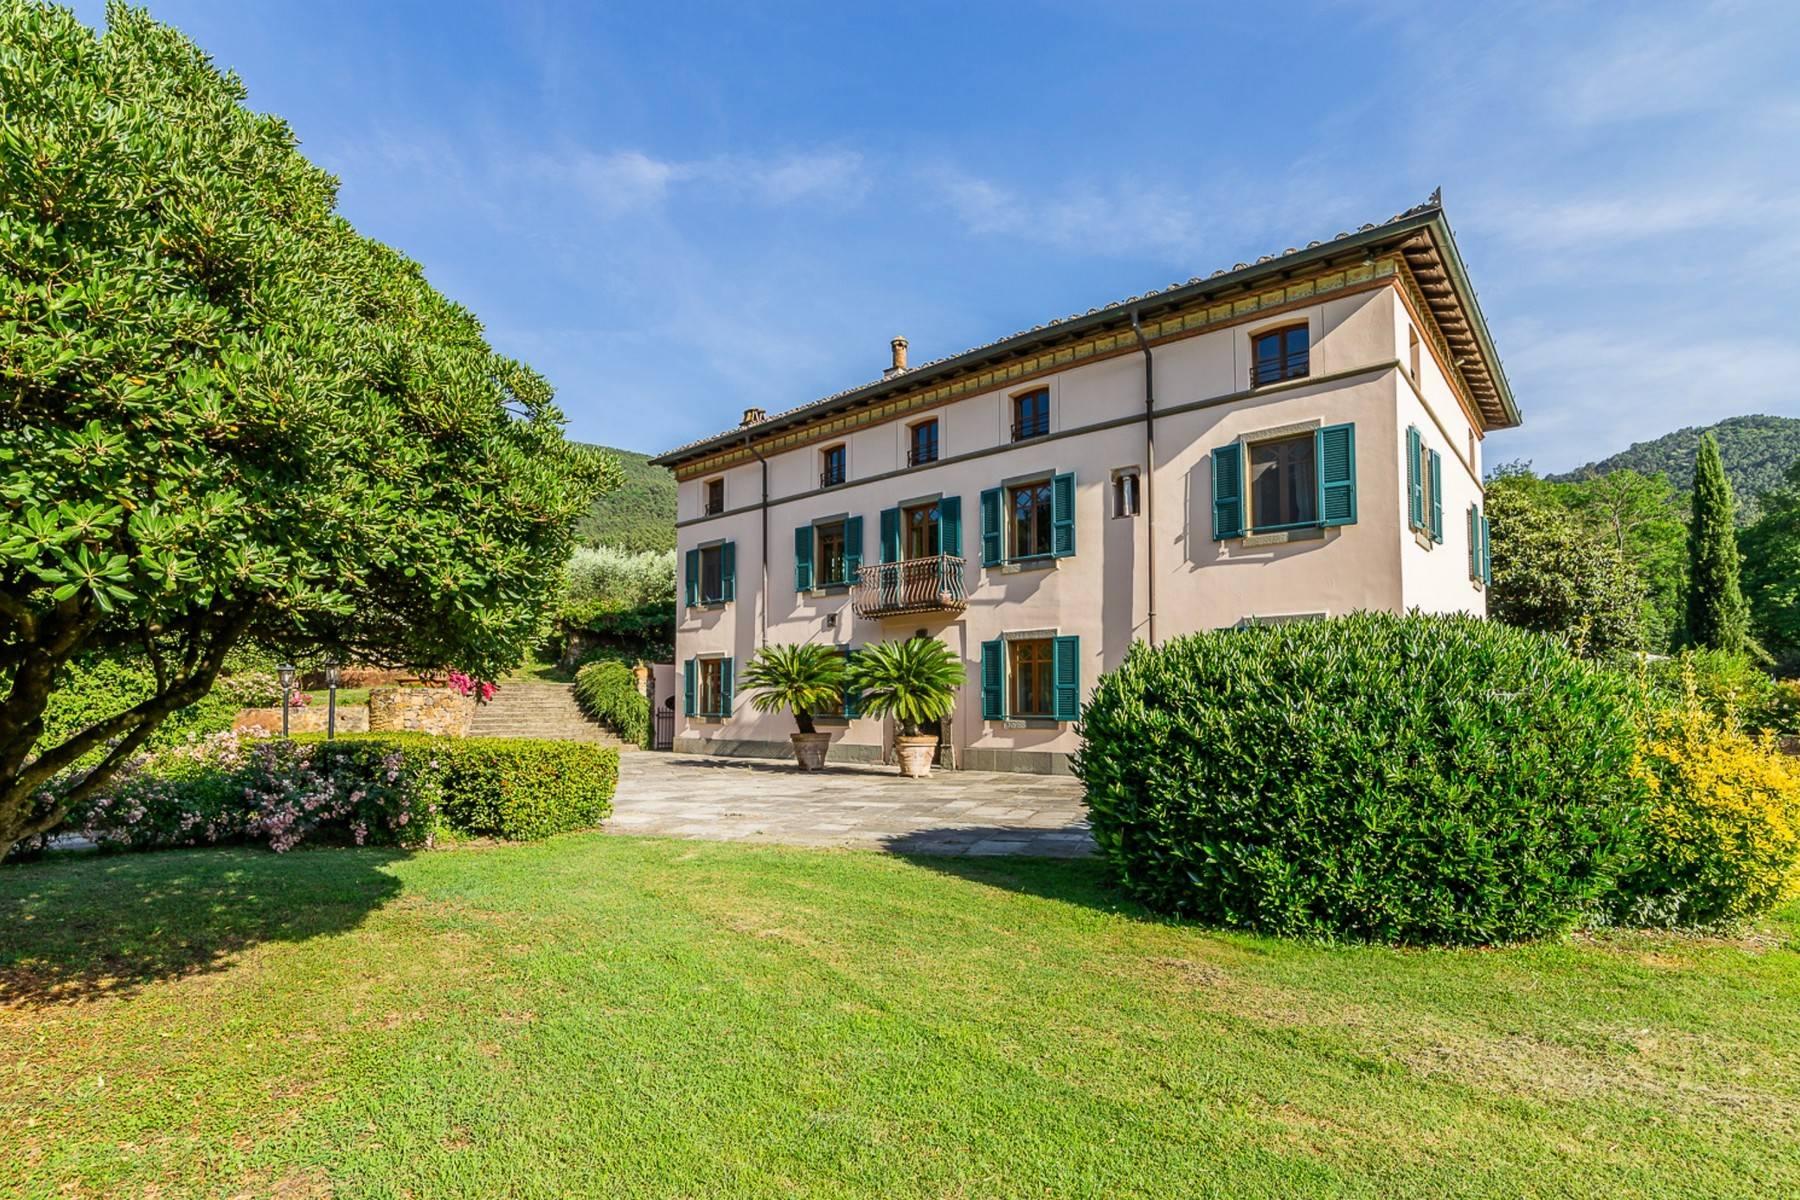 Majestic Luxury Villa with outbuildings on the hills south of Lucca - 5